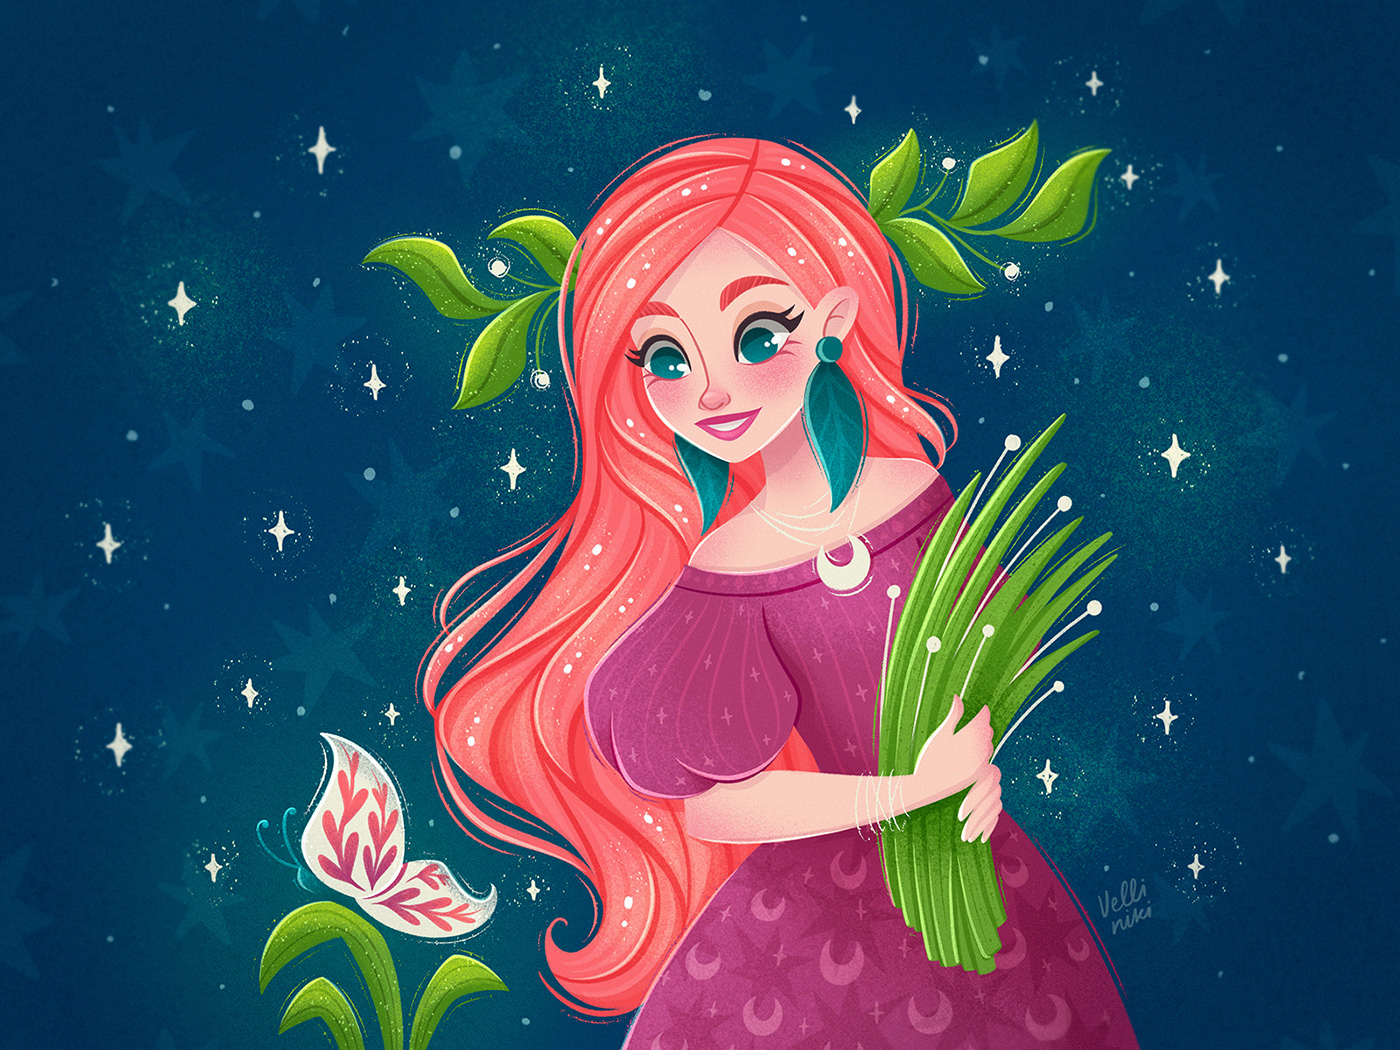 The Maiden who gathers herbs and wears a silver jewelry.